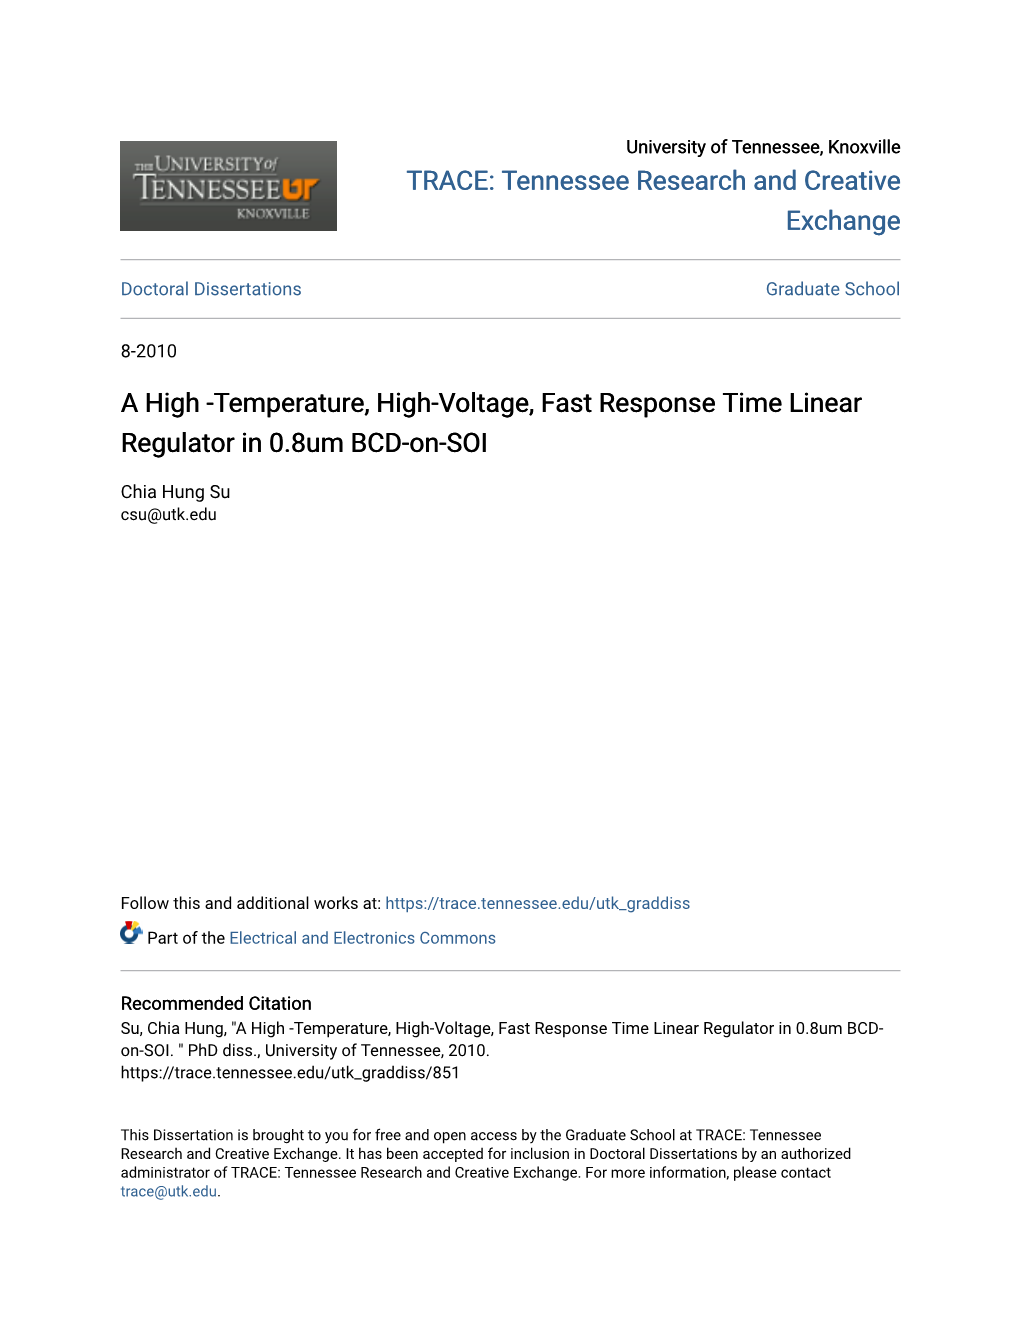 A High -Temperature, High-Voltage, Fast Response Time Linear Regulator in 0.8Um BCD-On-SOI